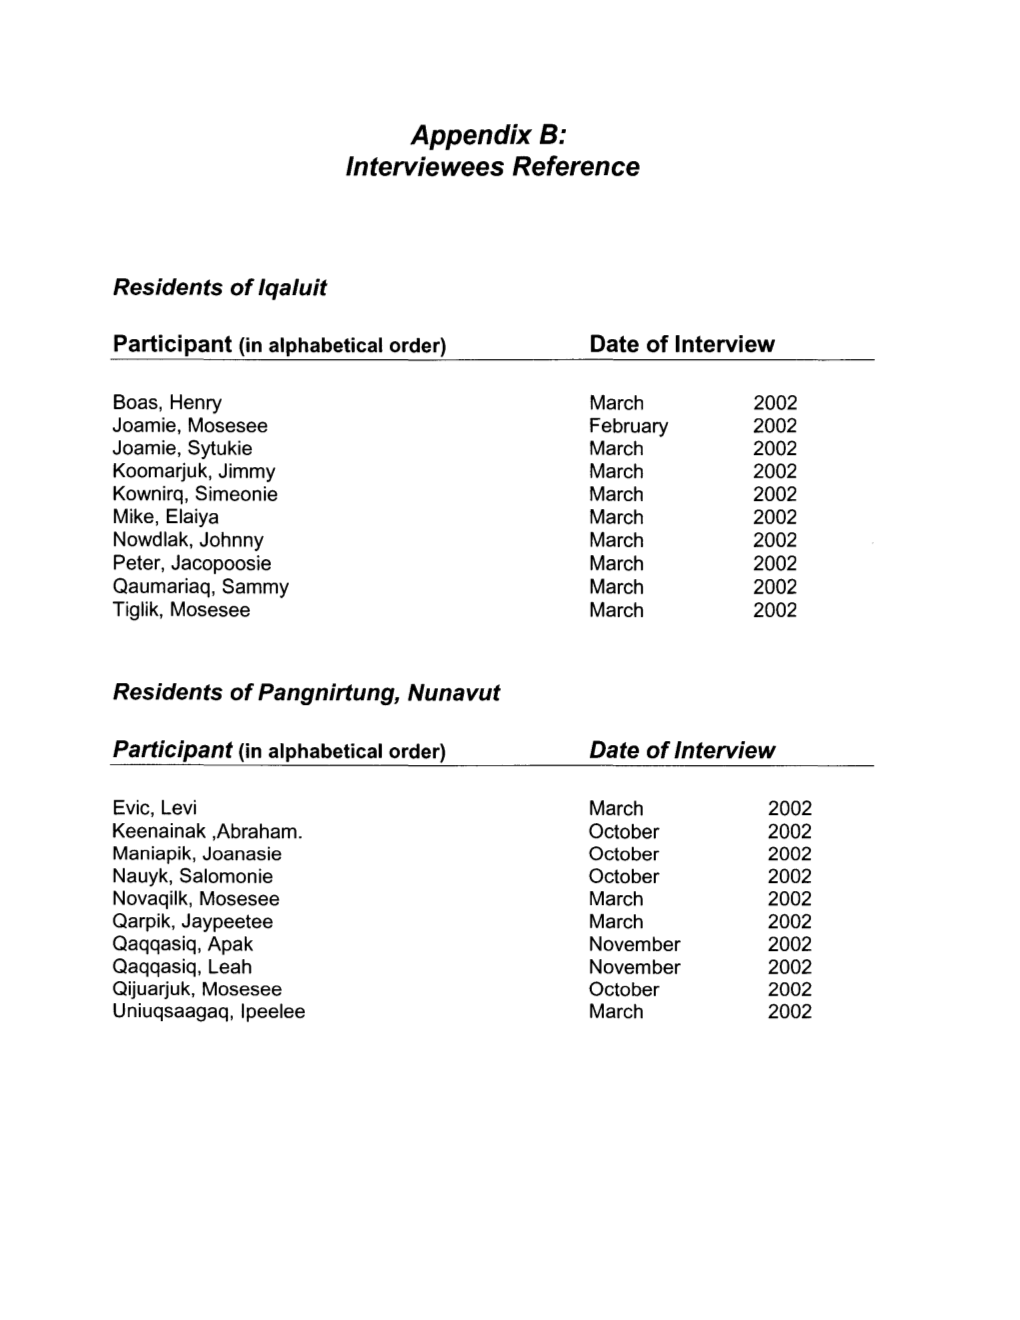 Appendix B: Interviewees Reference